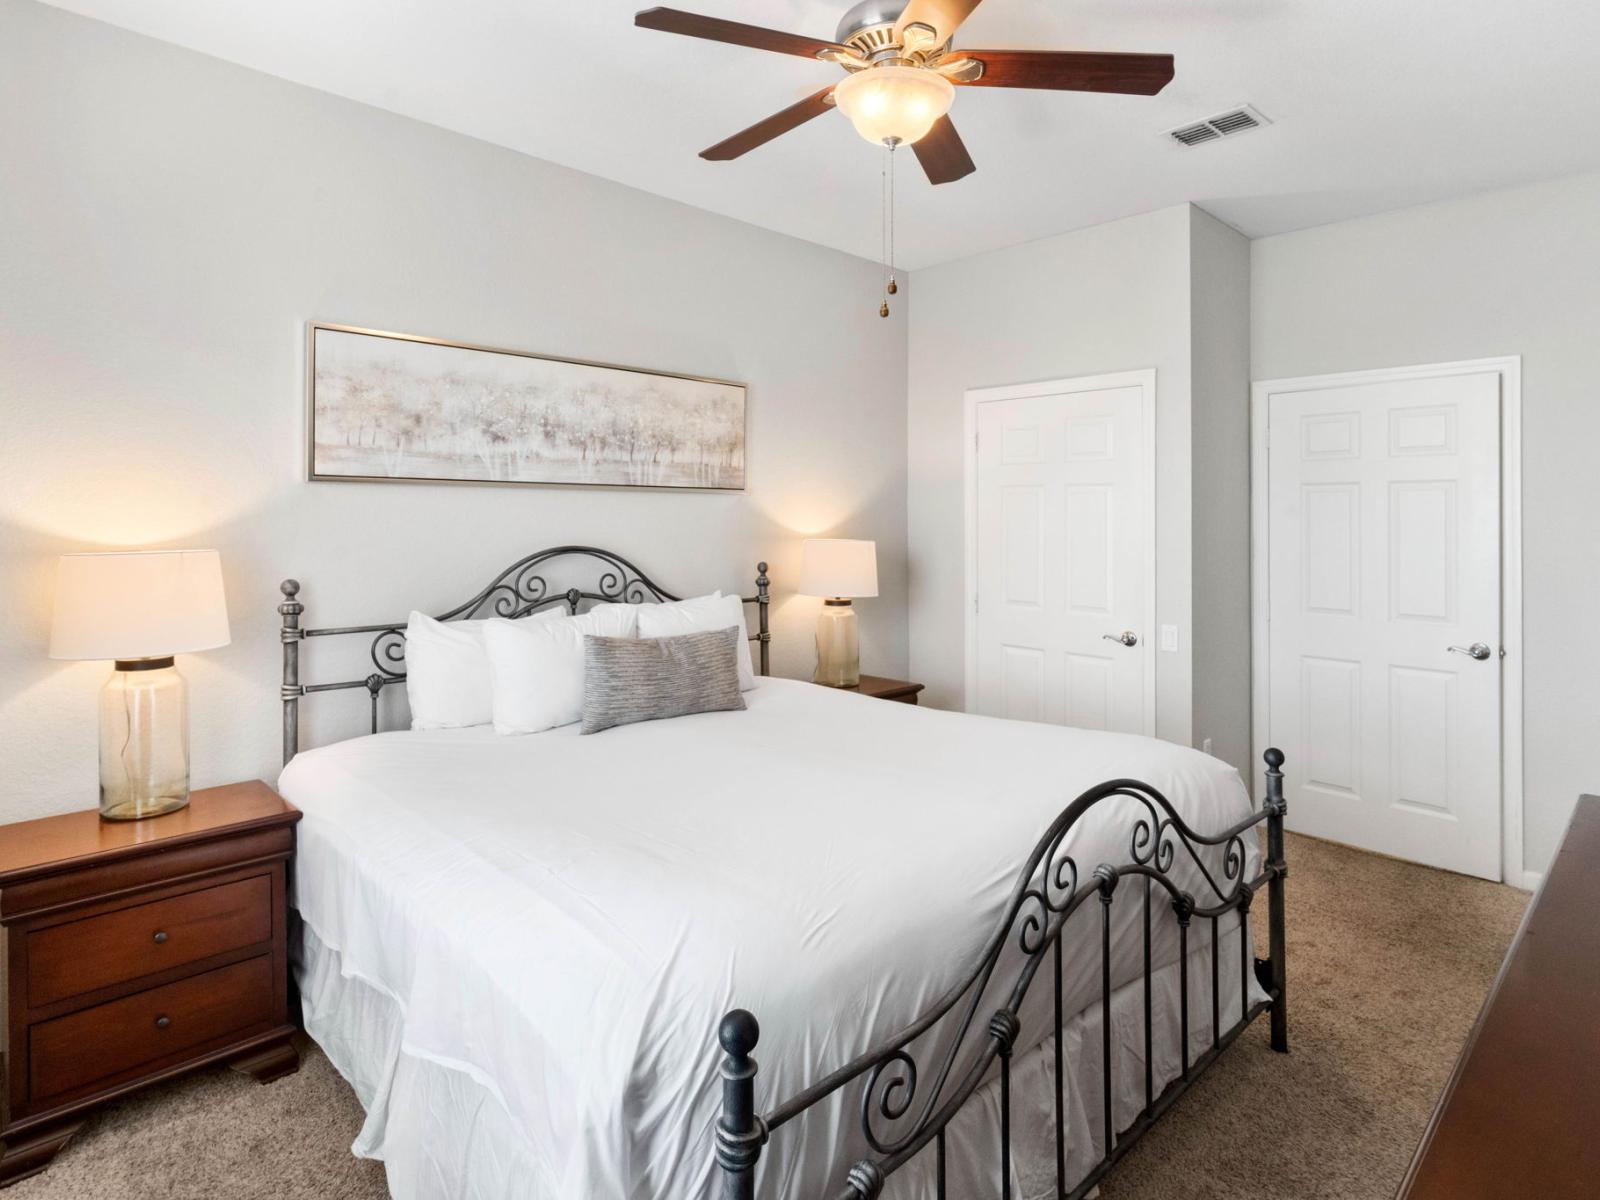 Main bedroom with ceiling fan